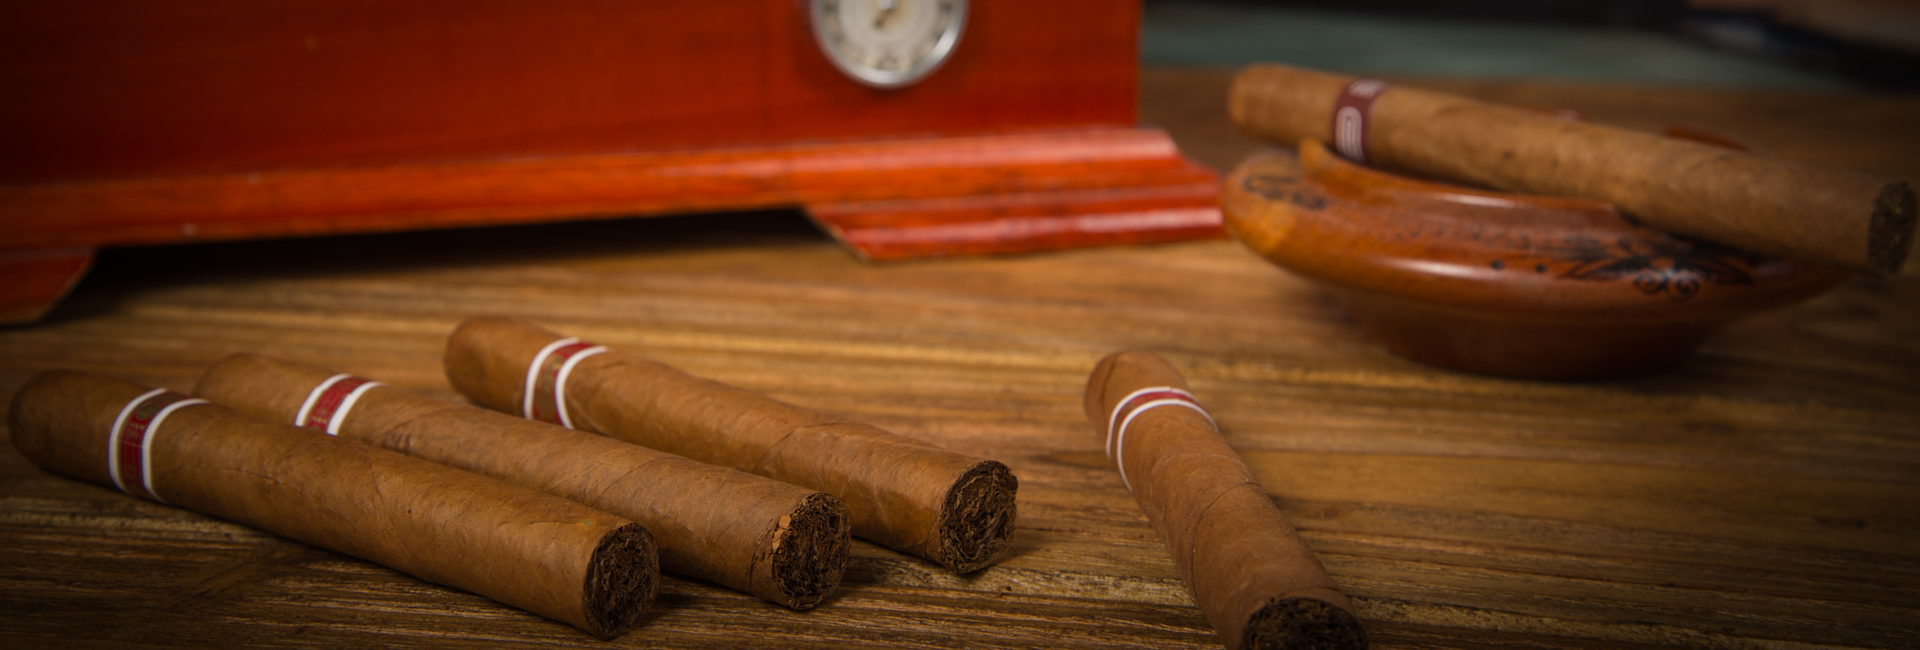 Multiple Cigars With Humidor